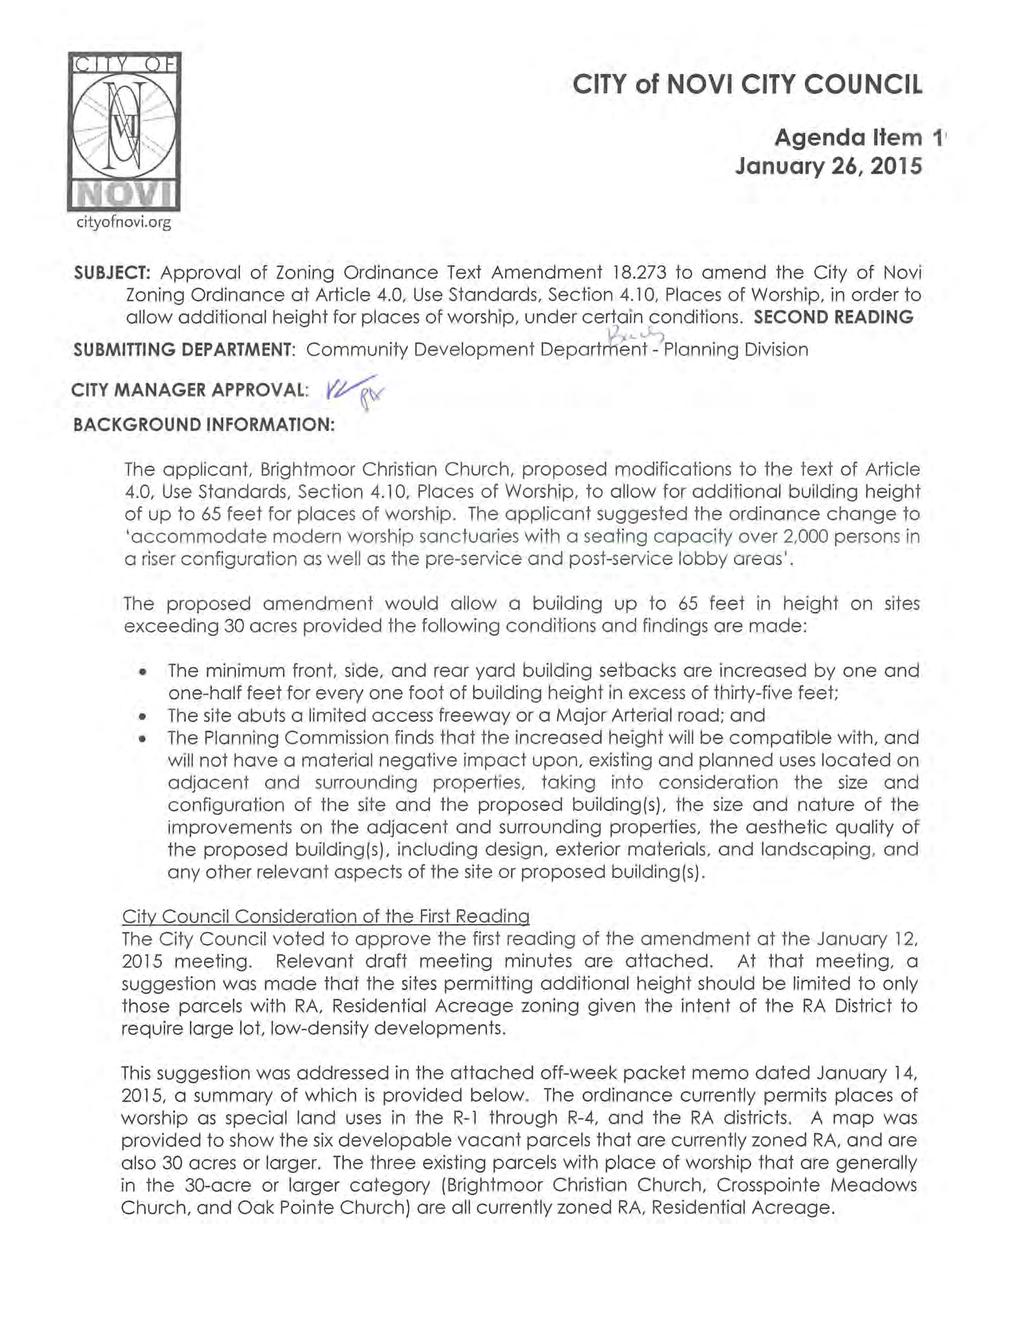 CITY of NOVI CITY COUNCIL Agenda Item 1 1 January 26, 2015 SUBJECT: Approval of Zoning Ordinance Text Amendment 18.273 to amend the City of Novi Zoning Ordinance at Article 4.